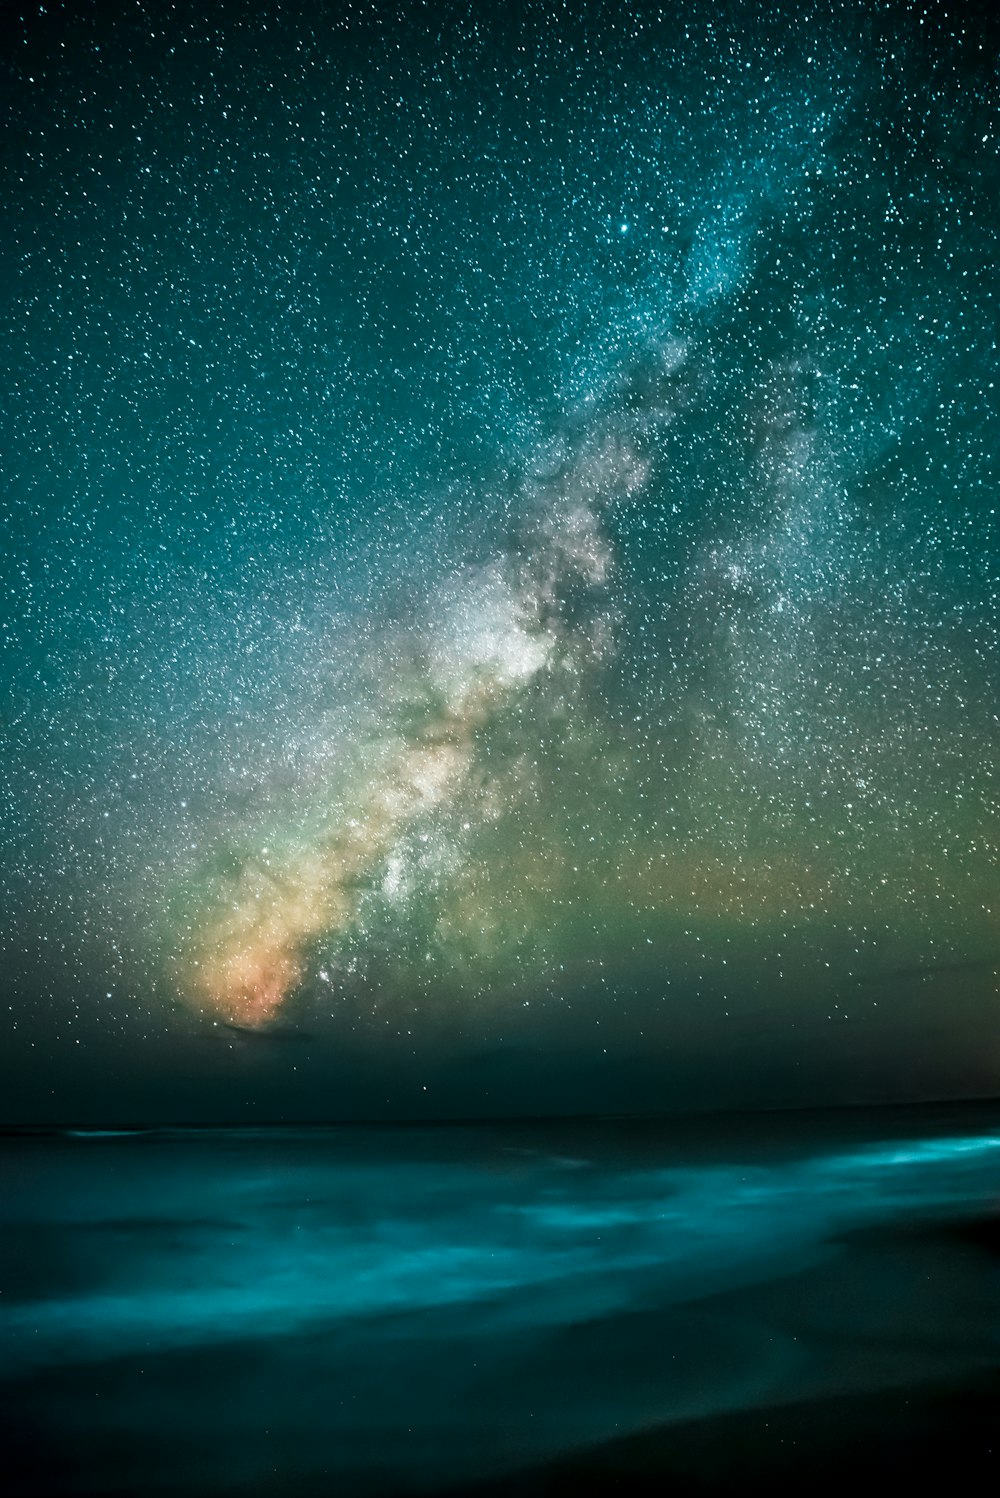 100+ Night Sky Pictures  Download Free Images & Stock Photos on Unsplash